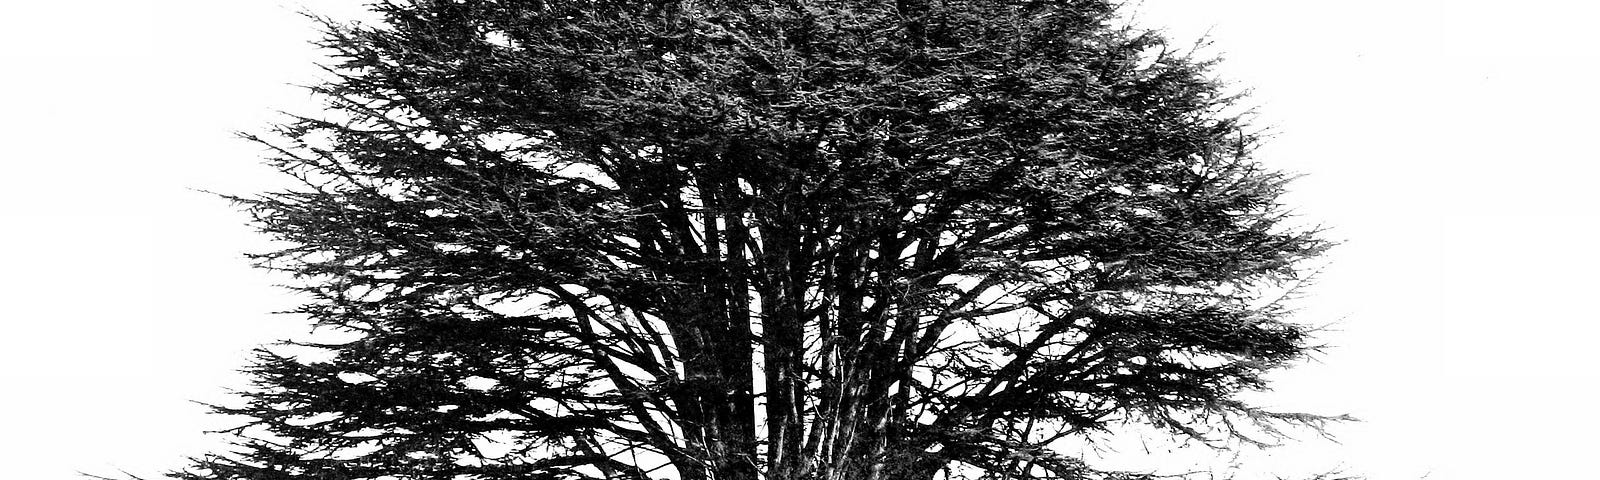 Great tree. Lebanon Cedar at Goodwood. Photo in black & white. Be like a tree and understand.